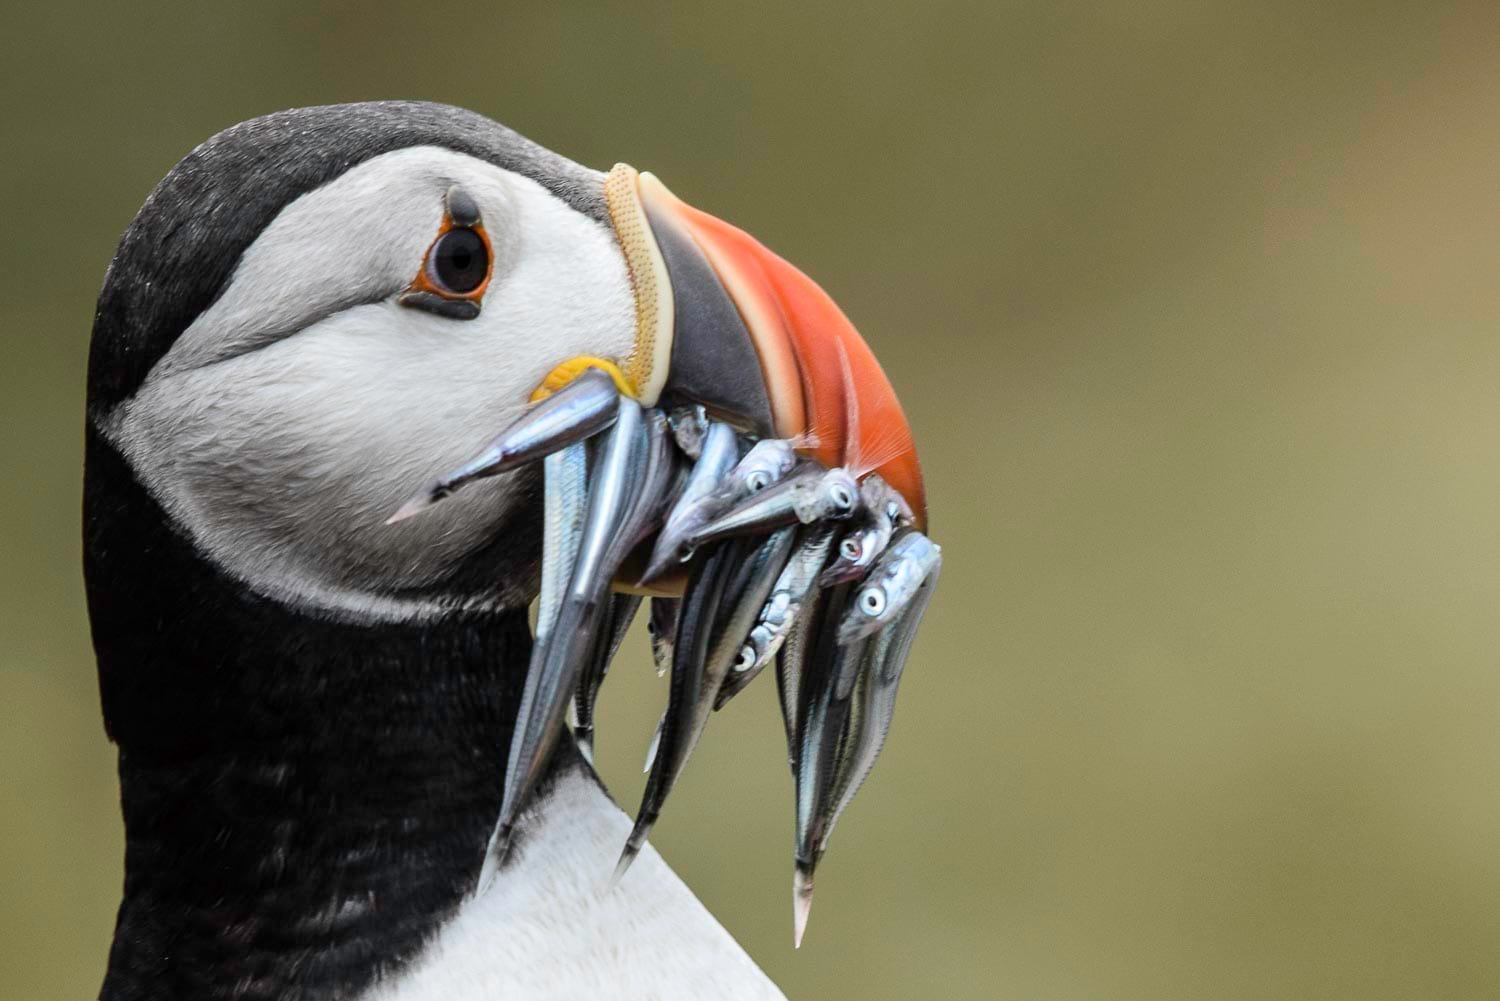 Puffin eating fish